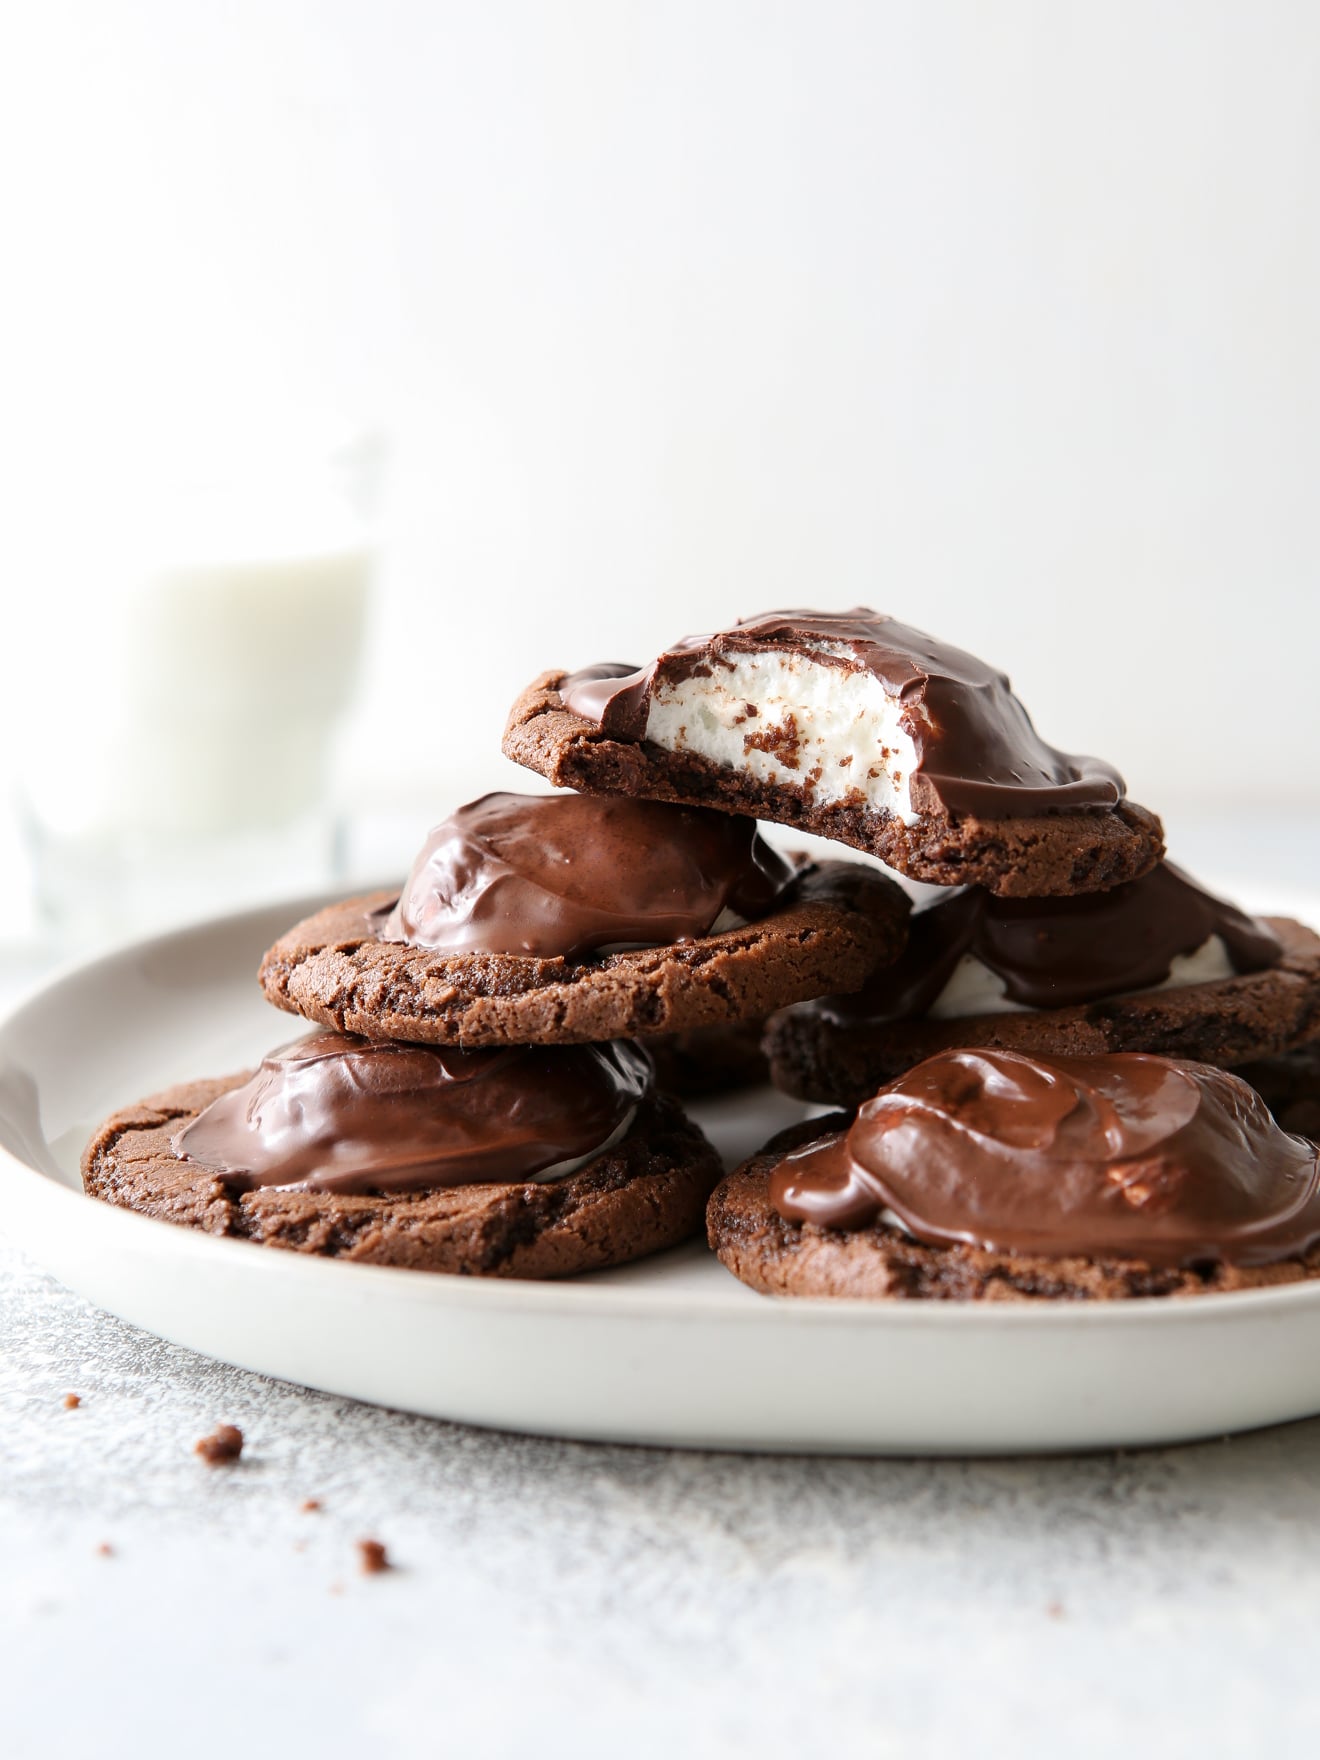 Chocolate Marshmallow Cookies - Completely Delicious